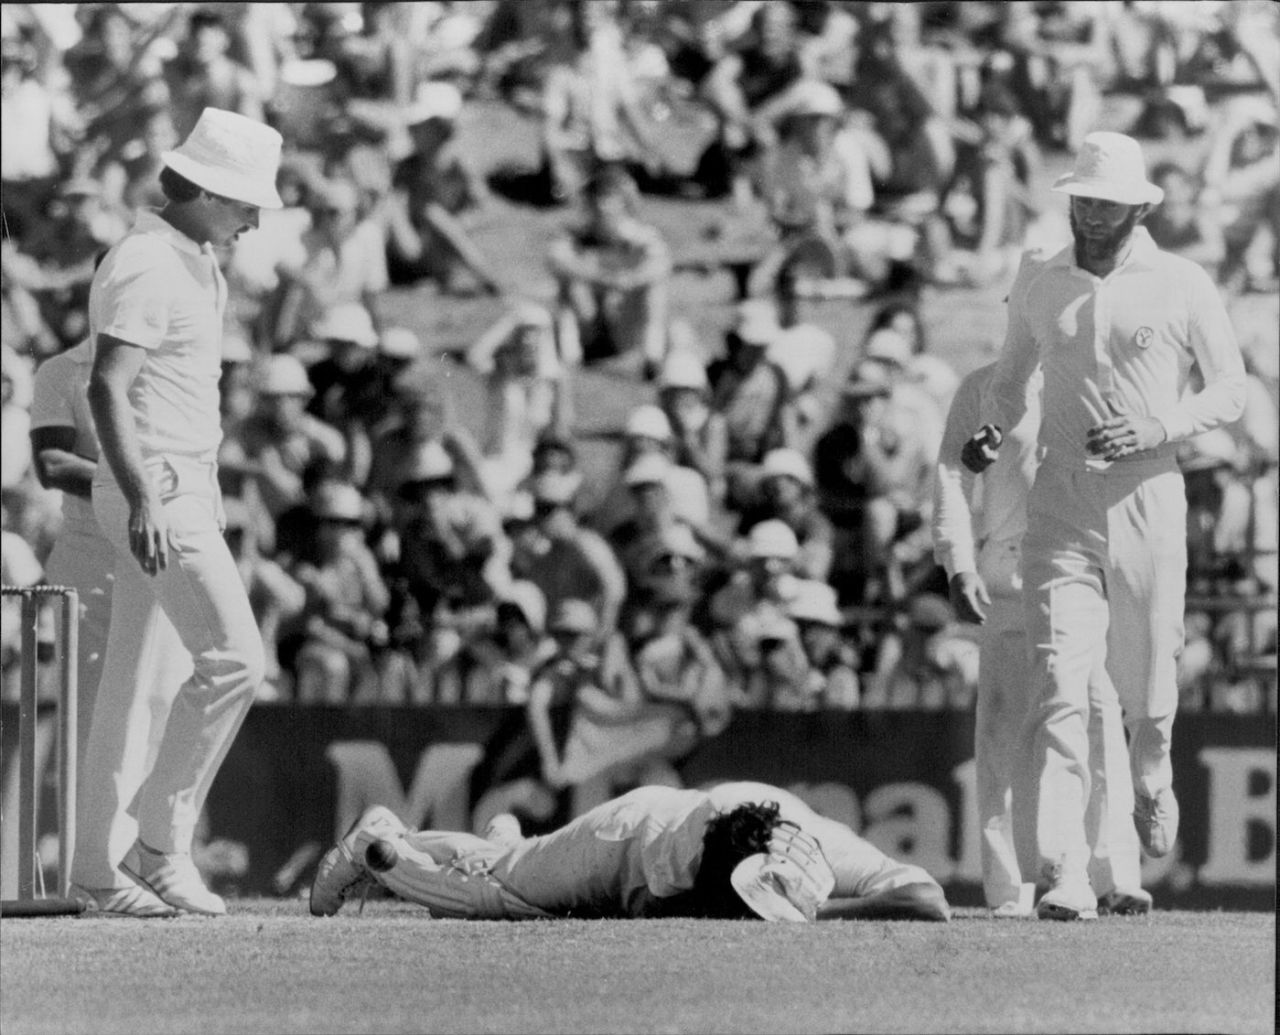 Sandeep Patil lies on the pitch after copping a Len Pascoe bouncer, first day, first Test, Australia vs India, Sydney Cricket Ground, Sydney, Australia, Jan 2, 1981